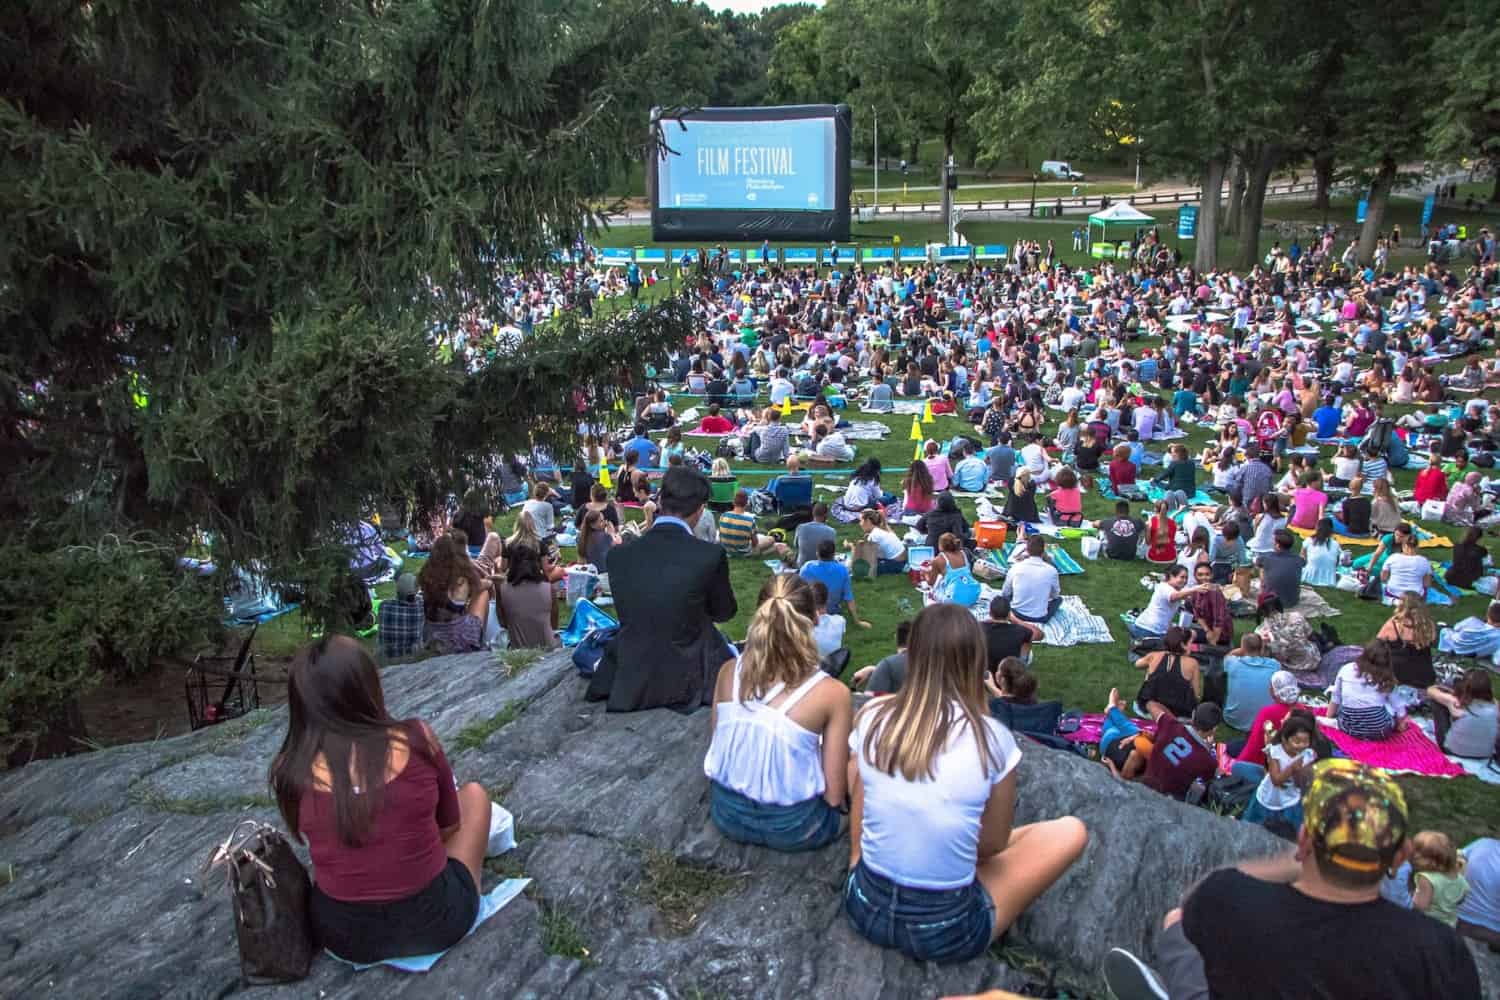 Crowd watching movies at the Central Park Conservancy Film Festival.